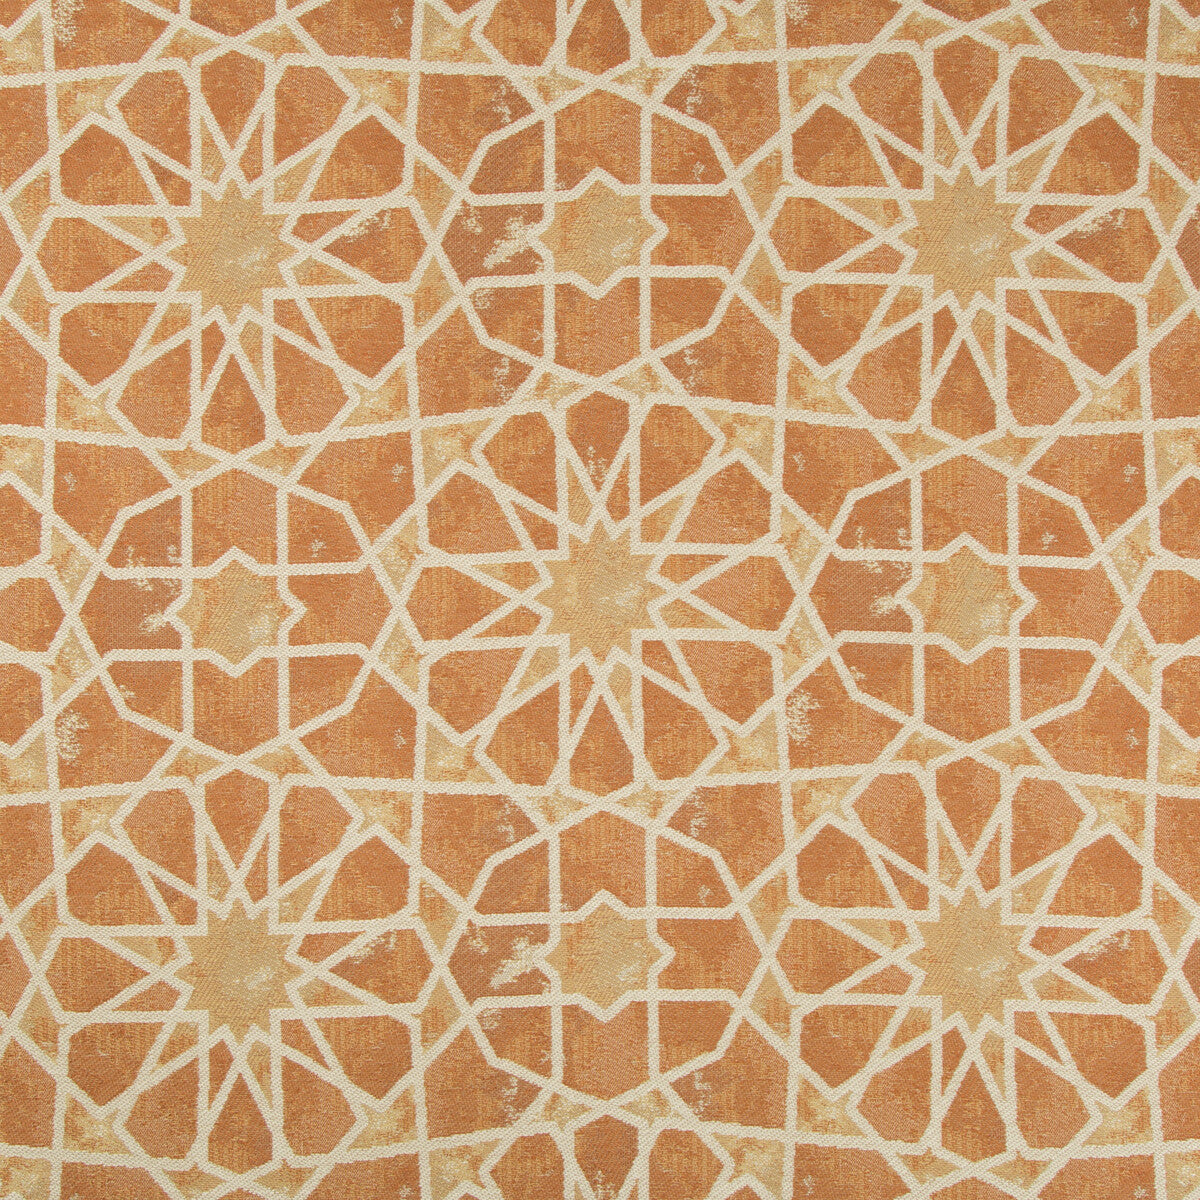 Kravet Design fabric in 35100-12 color - pattern 35100.12.0 - by Kravet Design in the Crypton Home collection